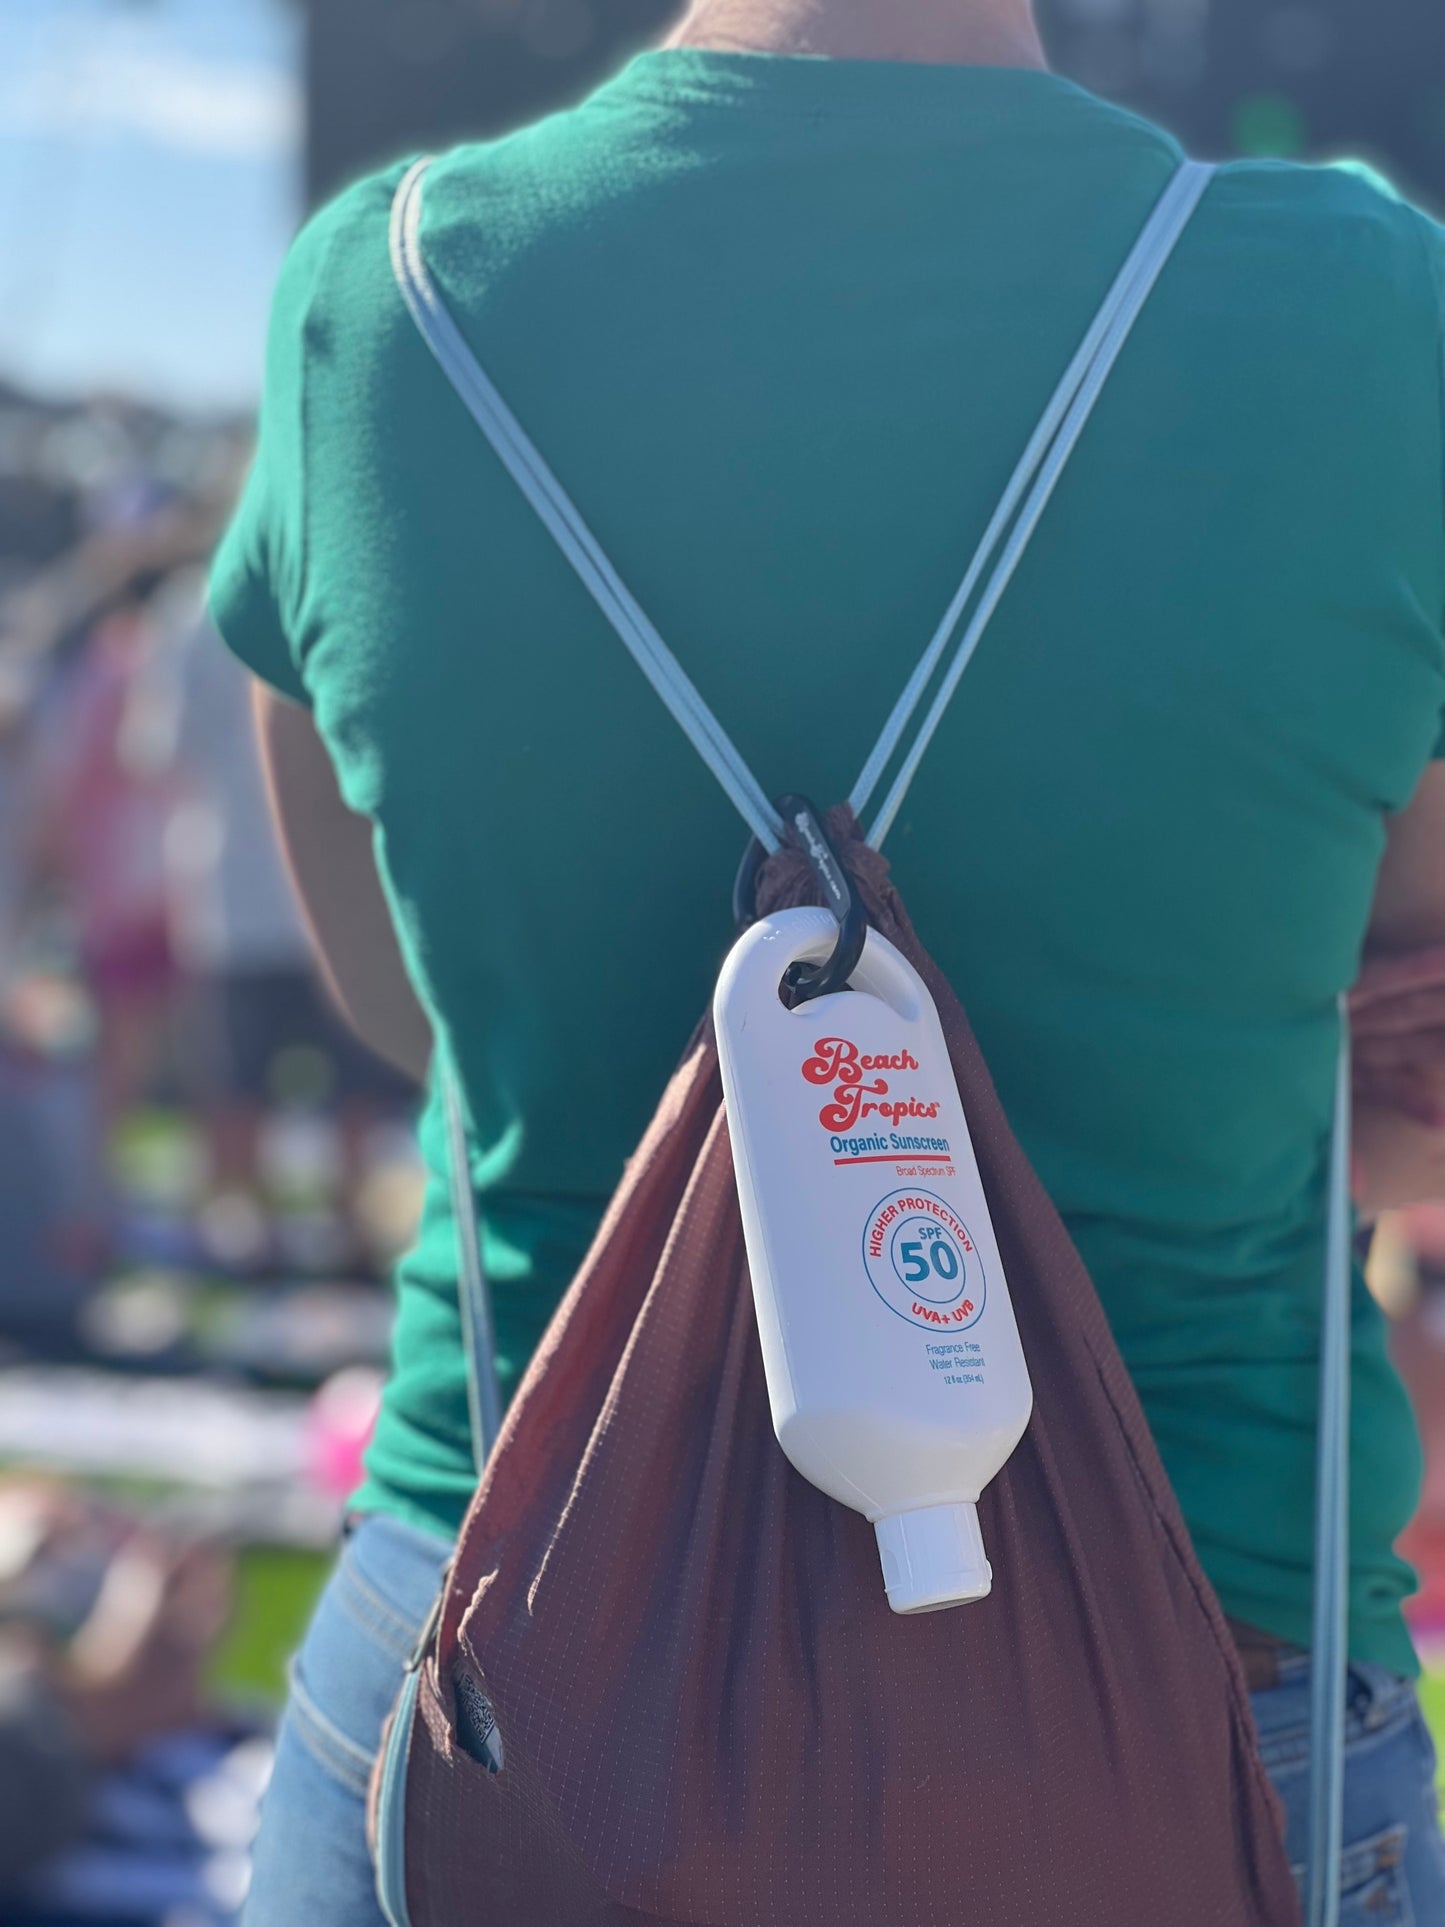 XL Sunscreen Flasks: Your Hidden Solution for Sneaking Alcohol